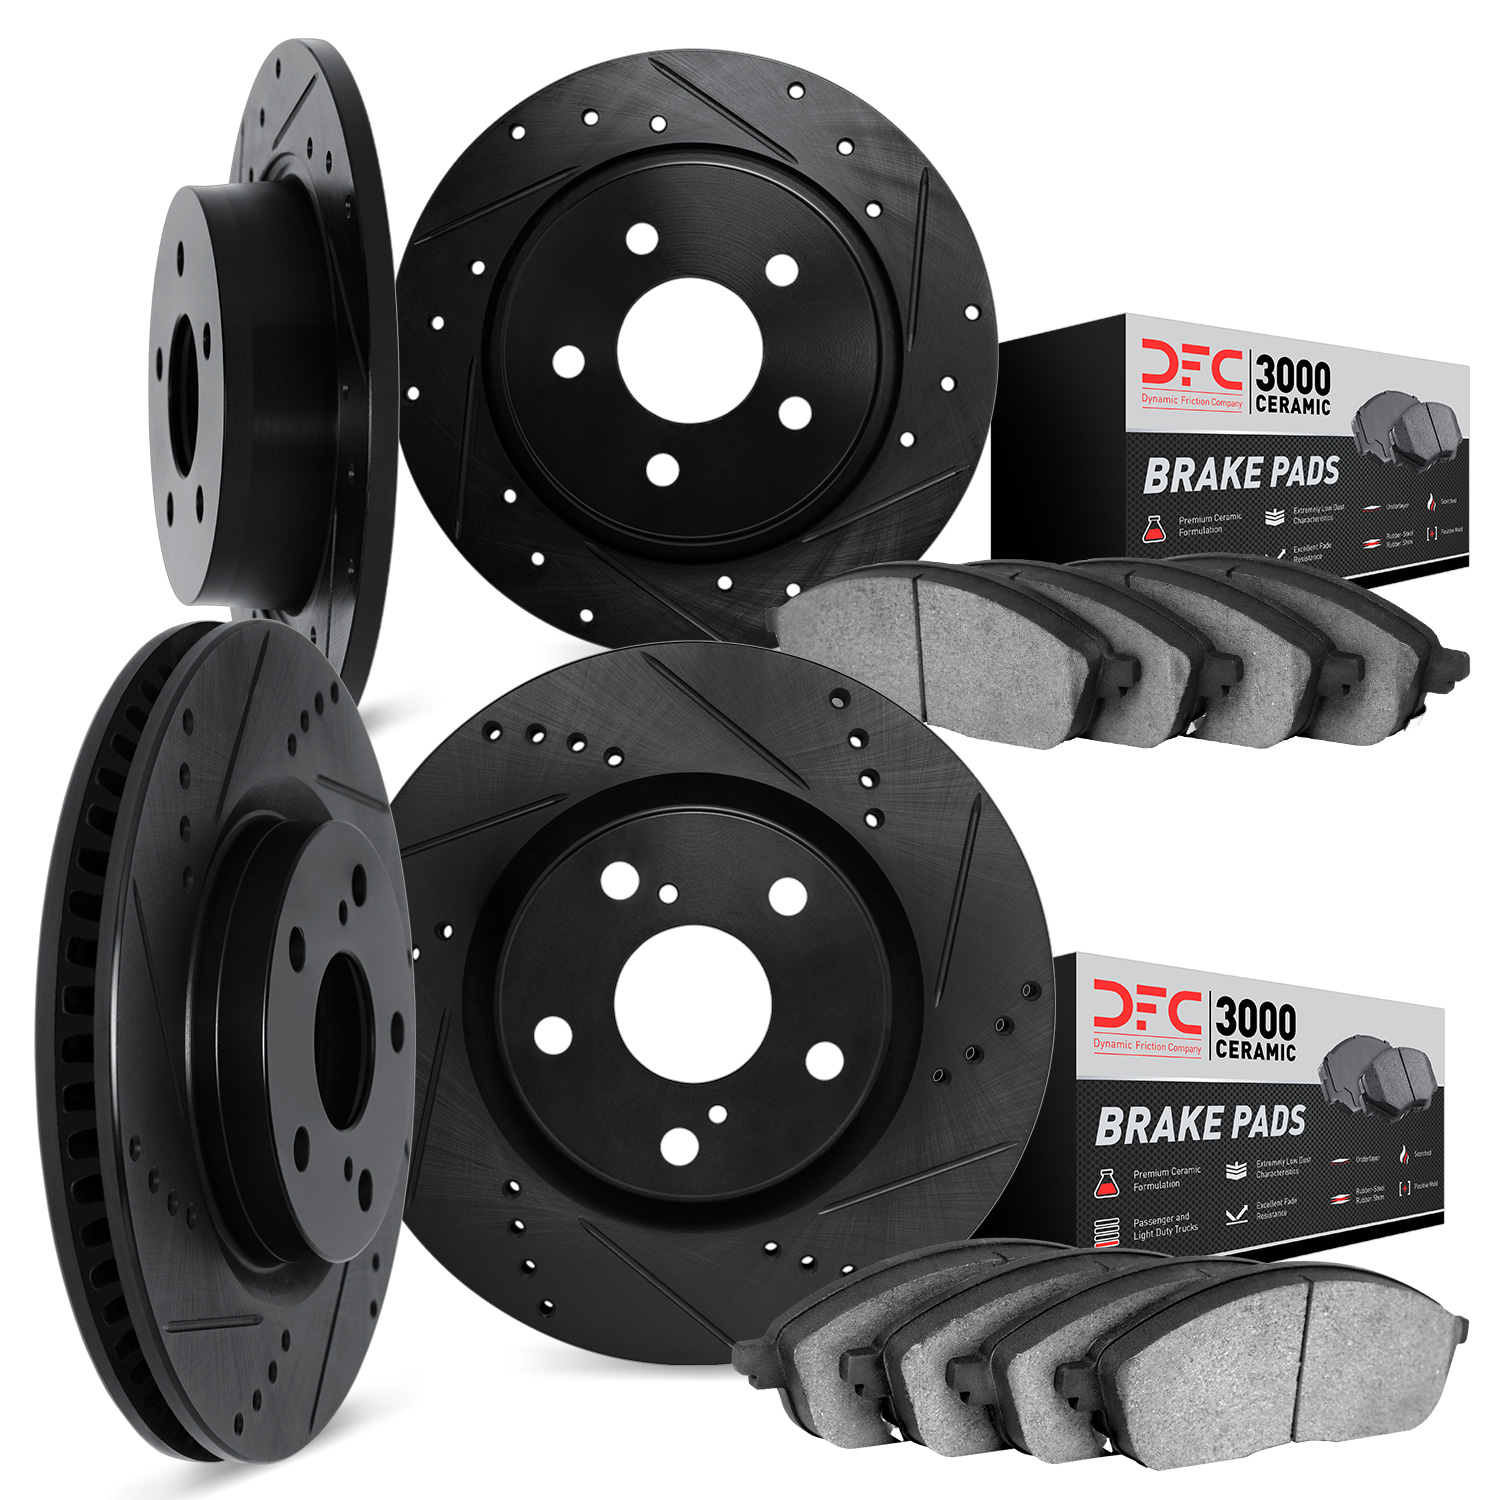 8304-13020 Drilled/Slotted Brake Rotors with 3000-Series Ceramic Brake Pads Kit [Black], 2008-2010 Subaru, Position: Front and R